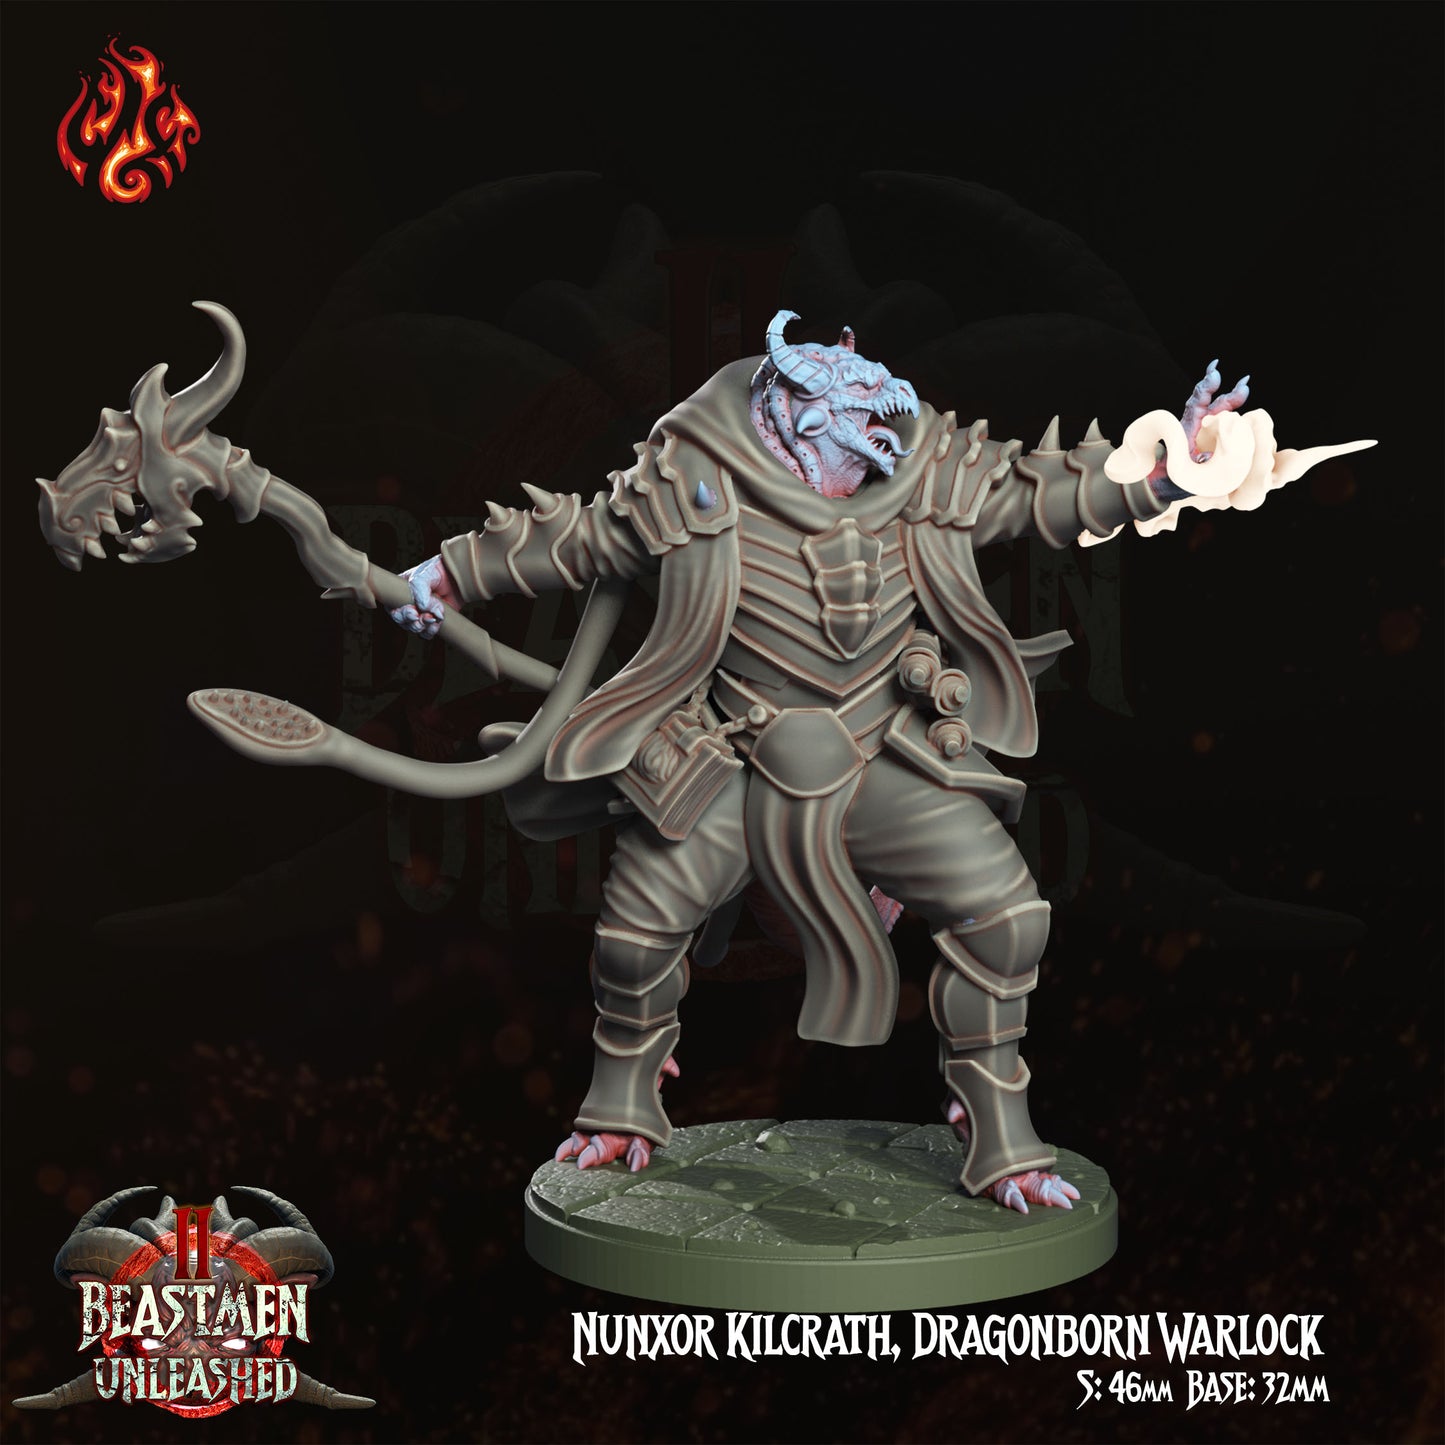 Nunxor Kilcrath, Dragonborn Warlock - Beastmen Unleashed - from Crippled God Foundry - Table-top gaming mini and collectable for painting.